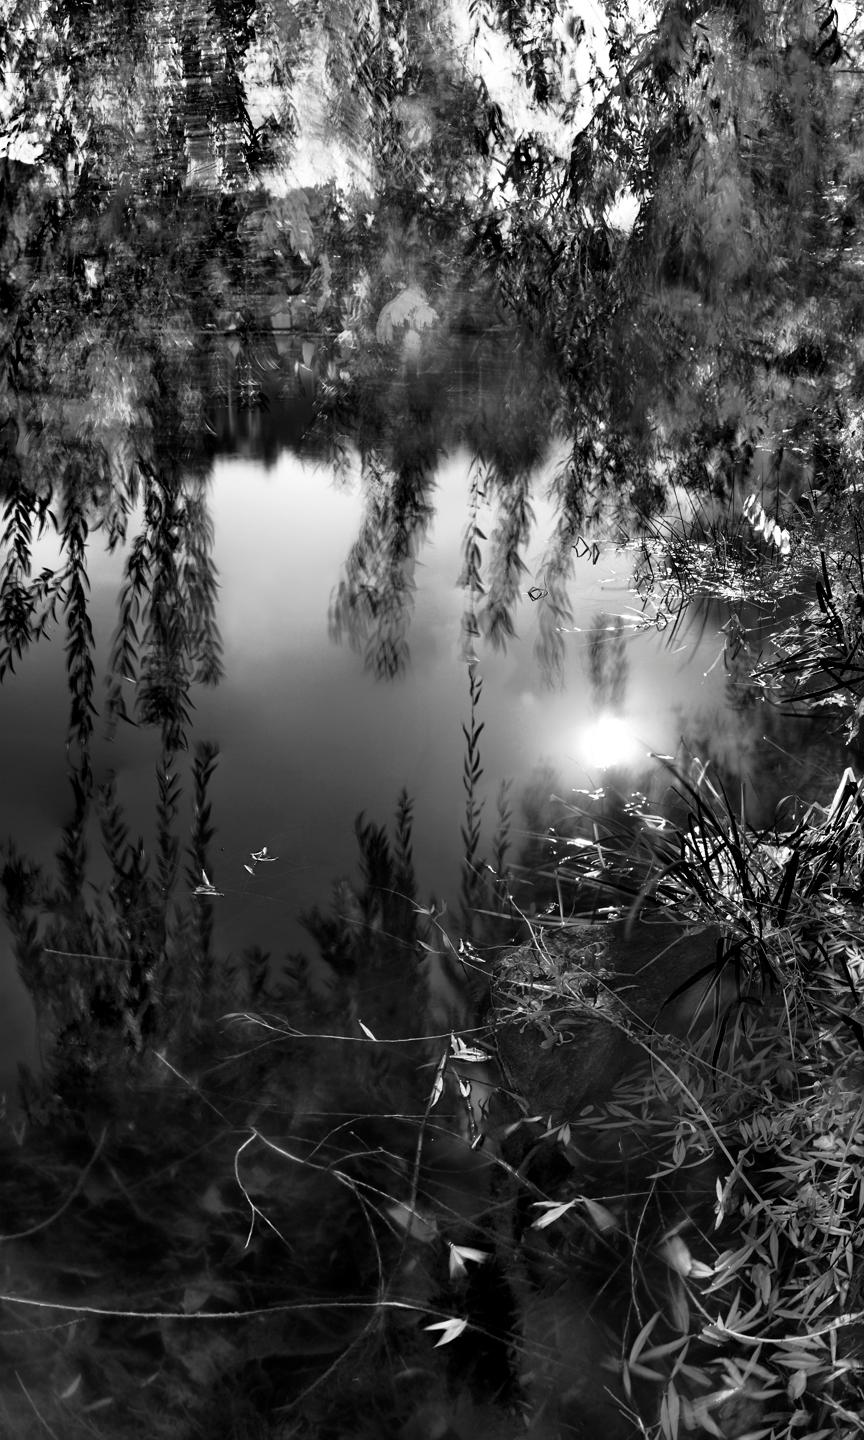 Jeff Chien-Hsing Liao Landscape Photograph - Central Park, New York City Black and White Photograph, Pond and Weeping Willow